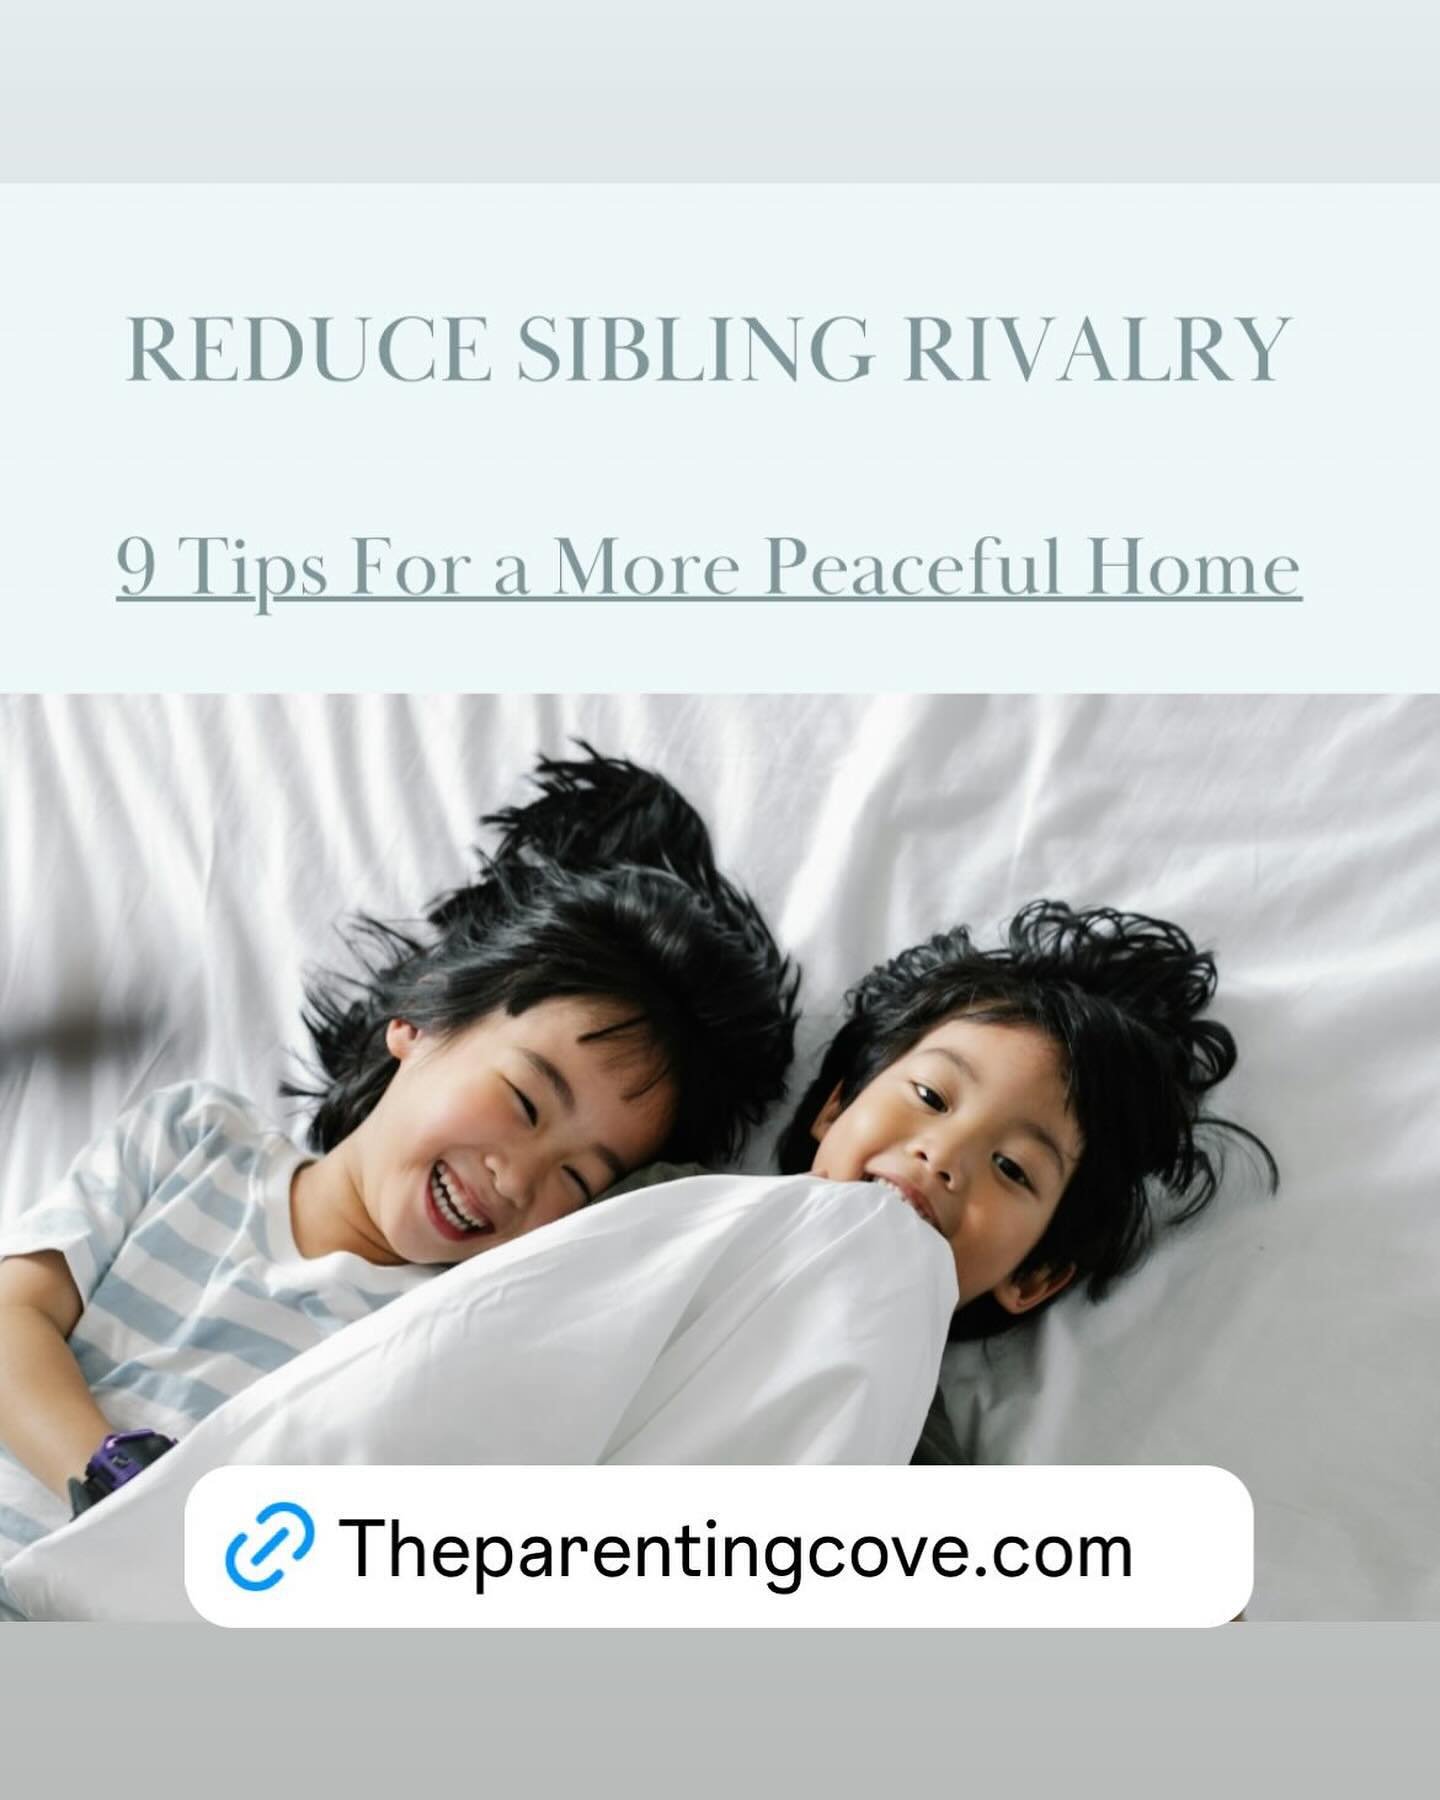 Is your house a symphony of squabbles? 

Sibling rivalry is real, but it can also be a chance for children to learn communication, compromise and kindness. Read our tips for a more peaceful home!
www.theparentingcove.com/blog/reducesiblingrivalry

#s